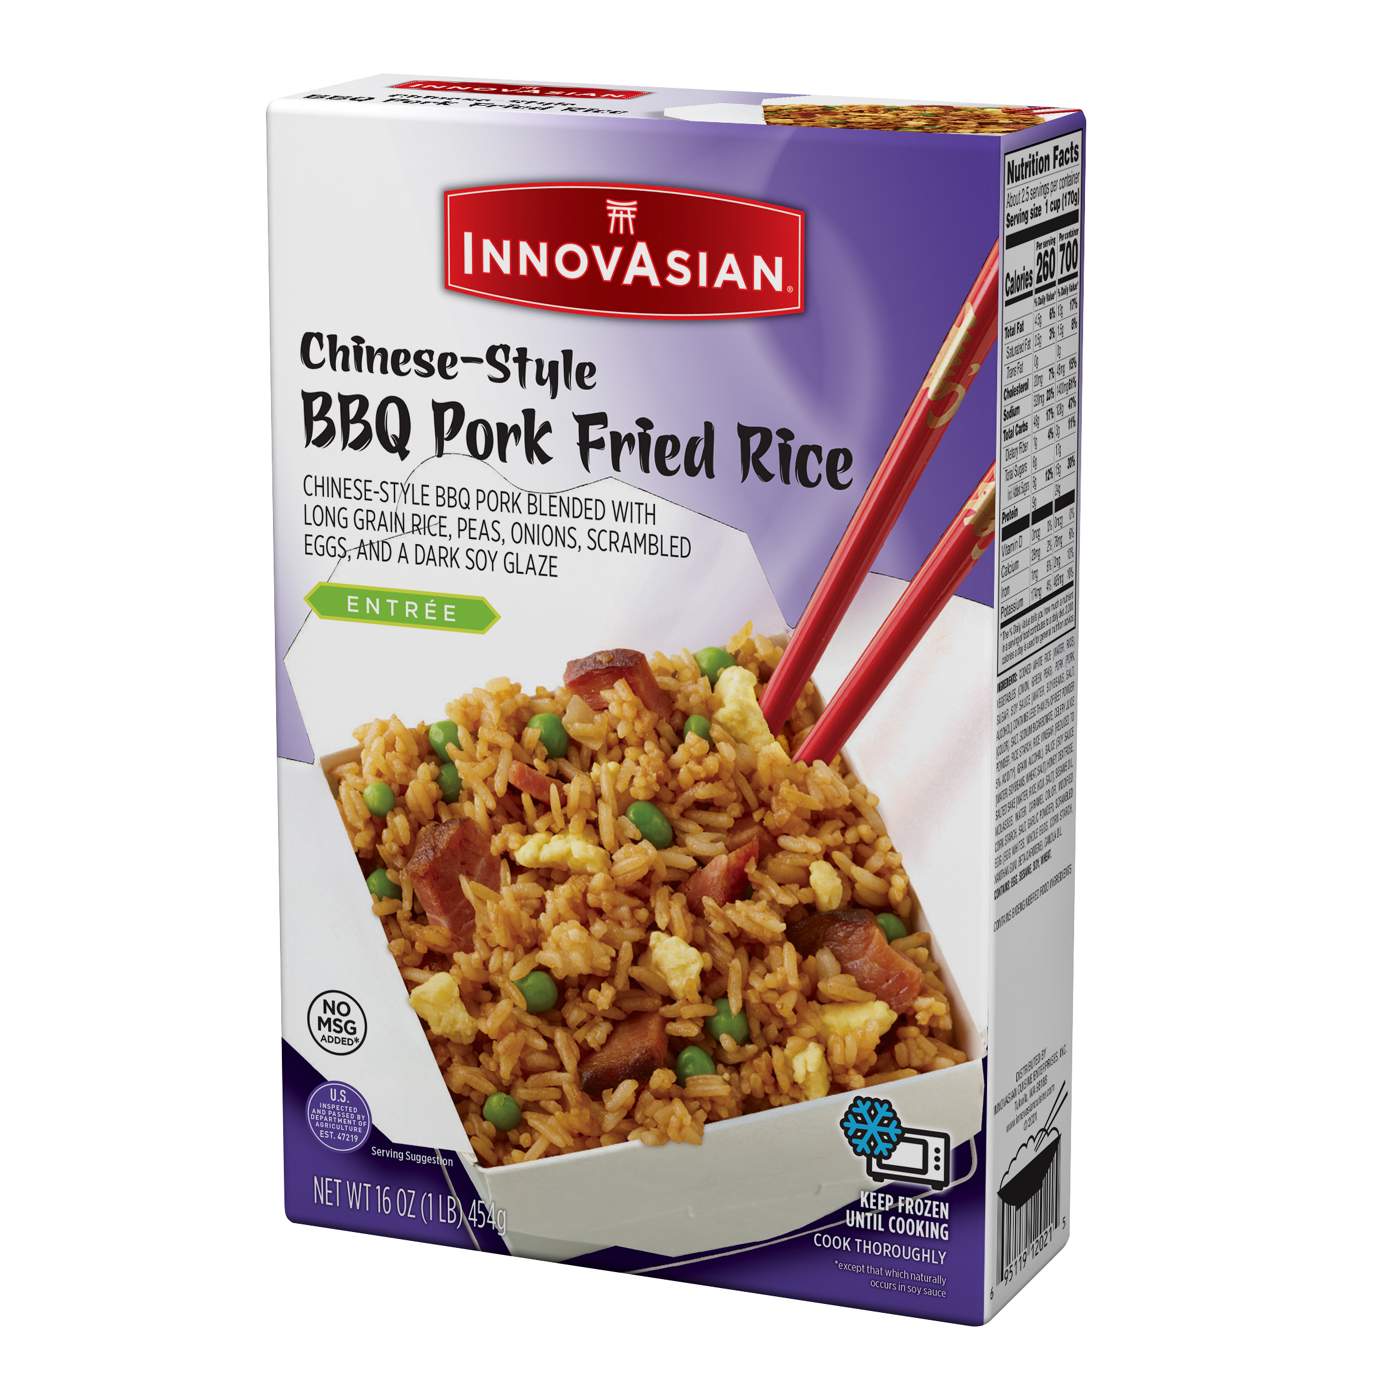 InnovAsian Frozen Chinese-Style BBQ Pork Fried Rice; image 5 of 11